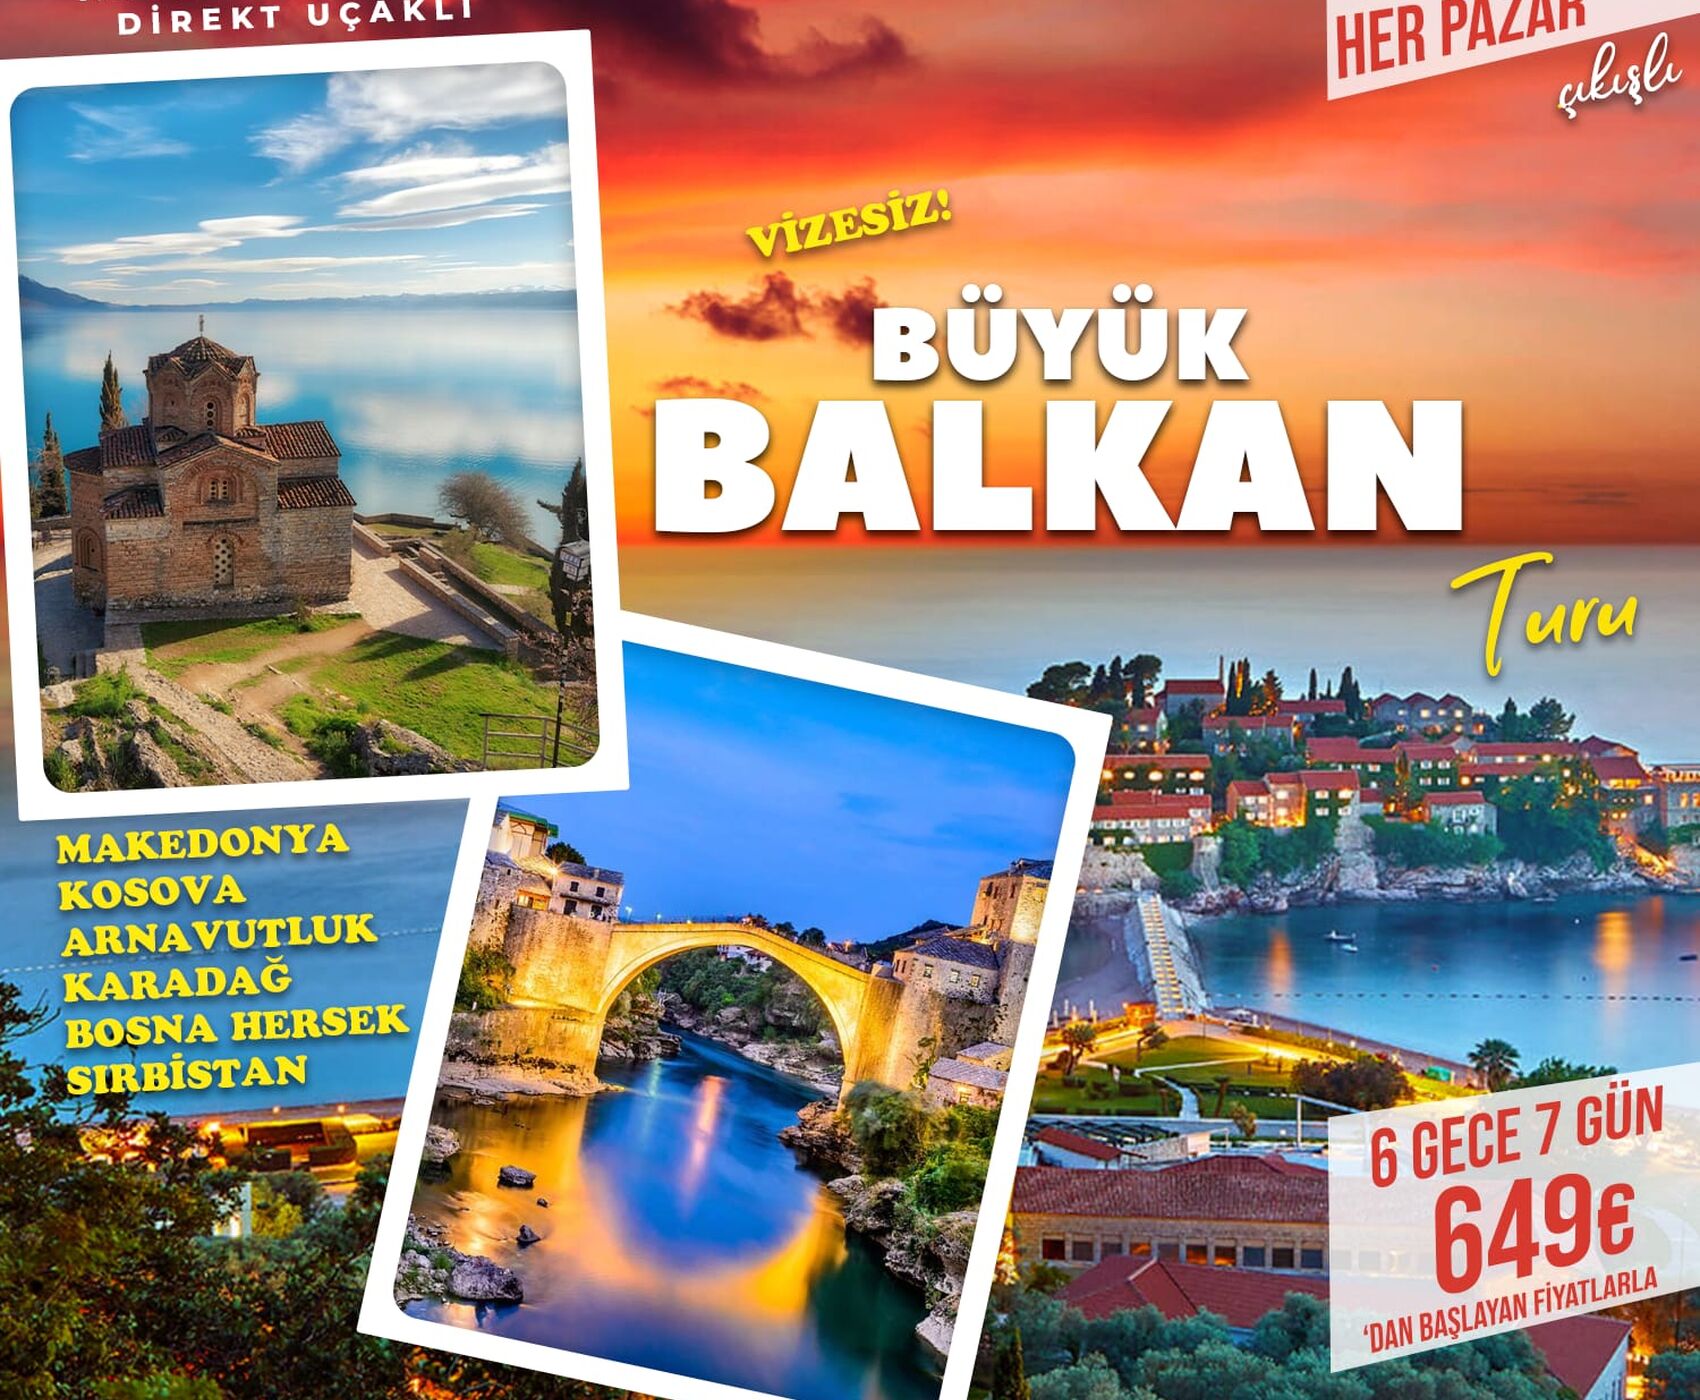 GREAT BALKAN TOUR WITH DIRECT FLIGHT FROM ANTALYA 6 COUNTRIES